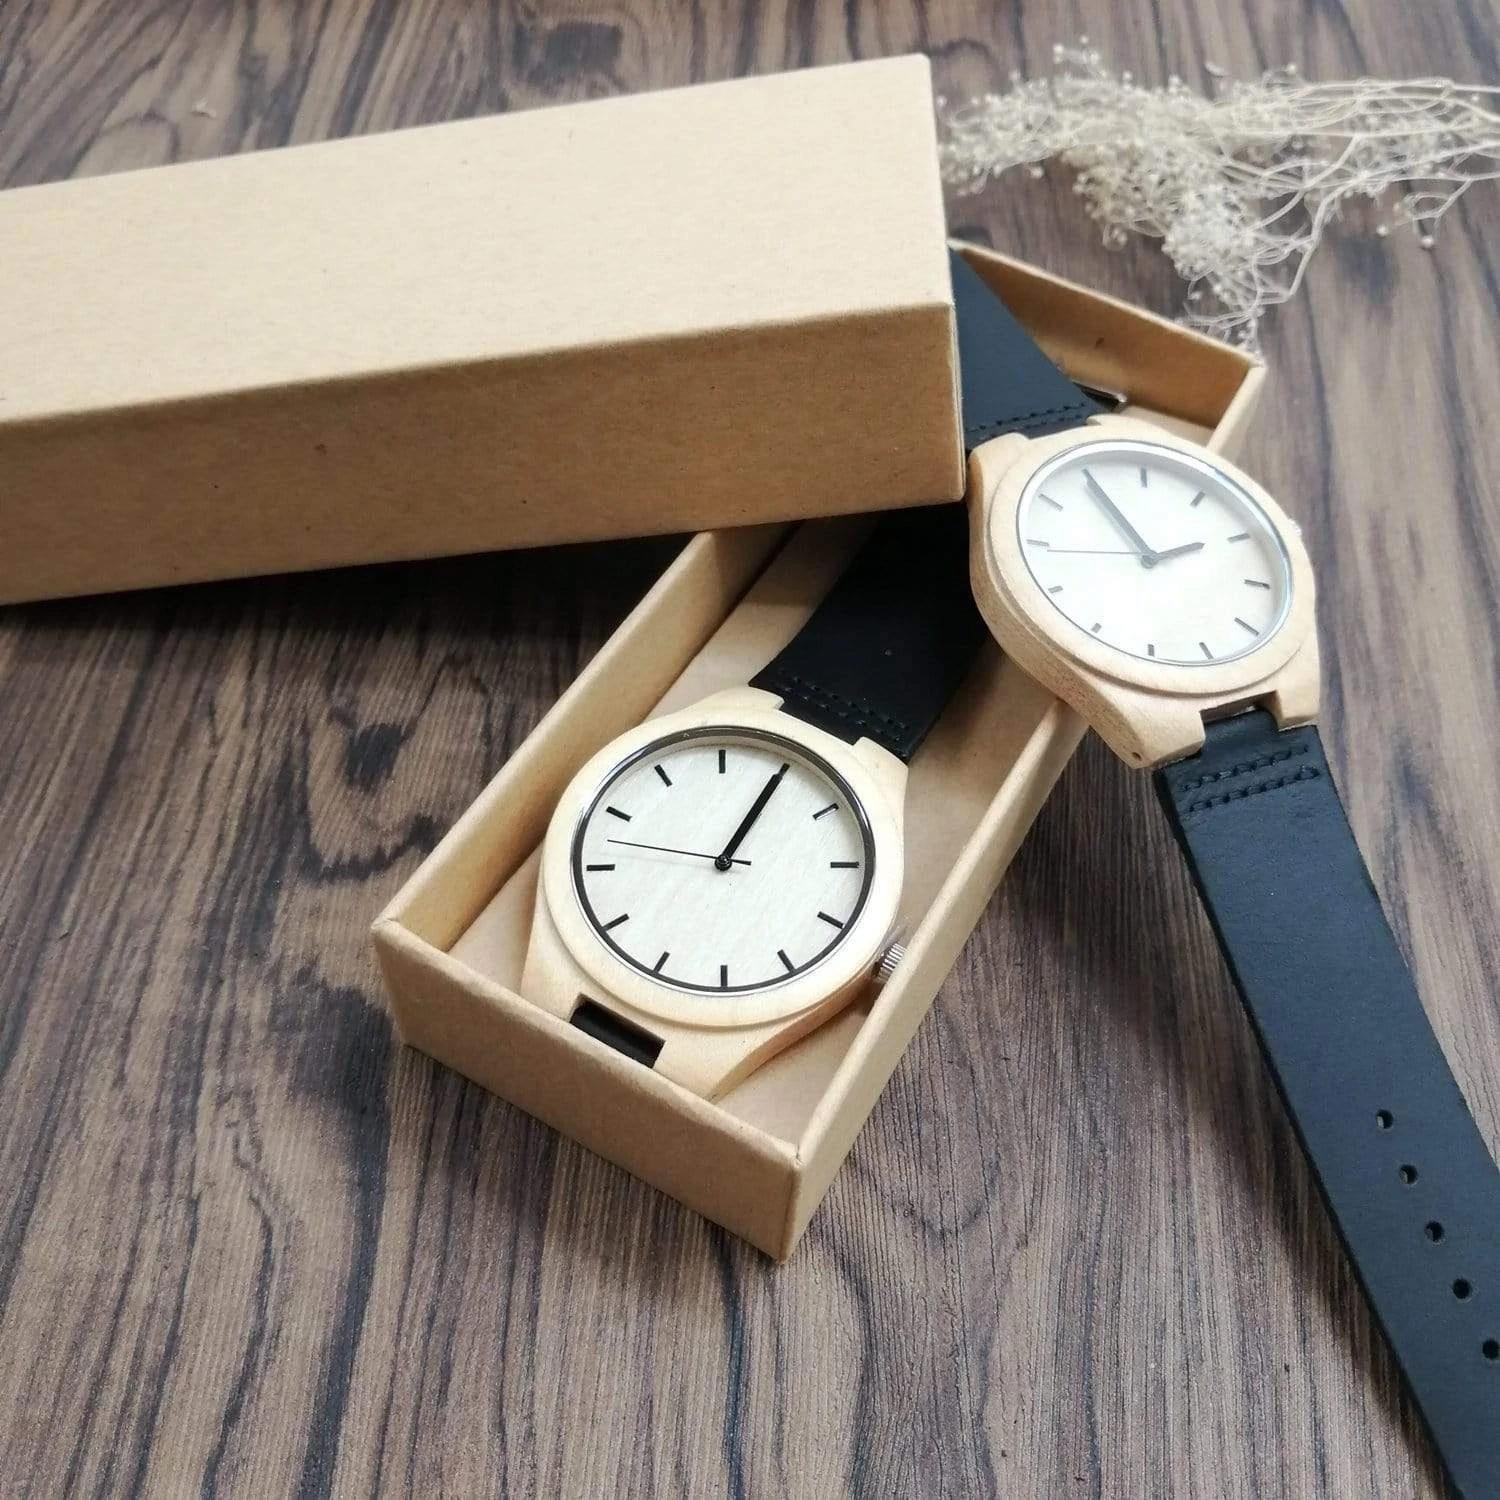 Wonderful Engraved Wooden Watch Gift For Son Beat Of My Heart